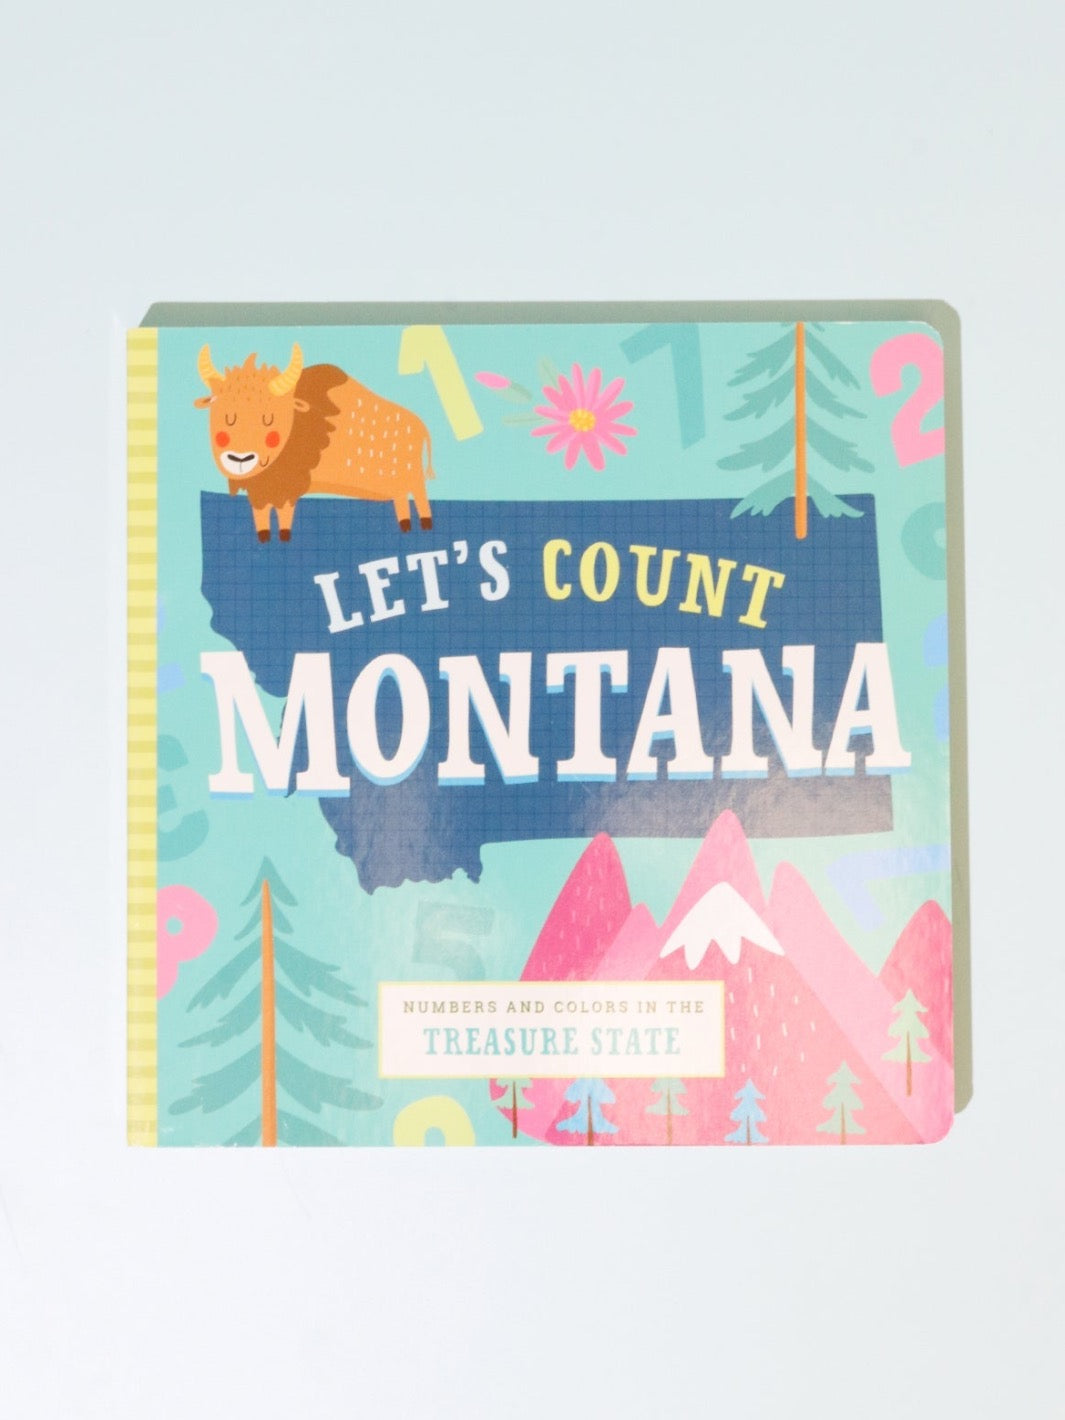 Let's Count Montana - Heyday